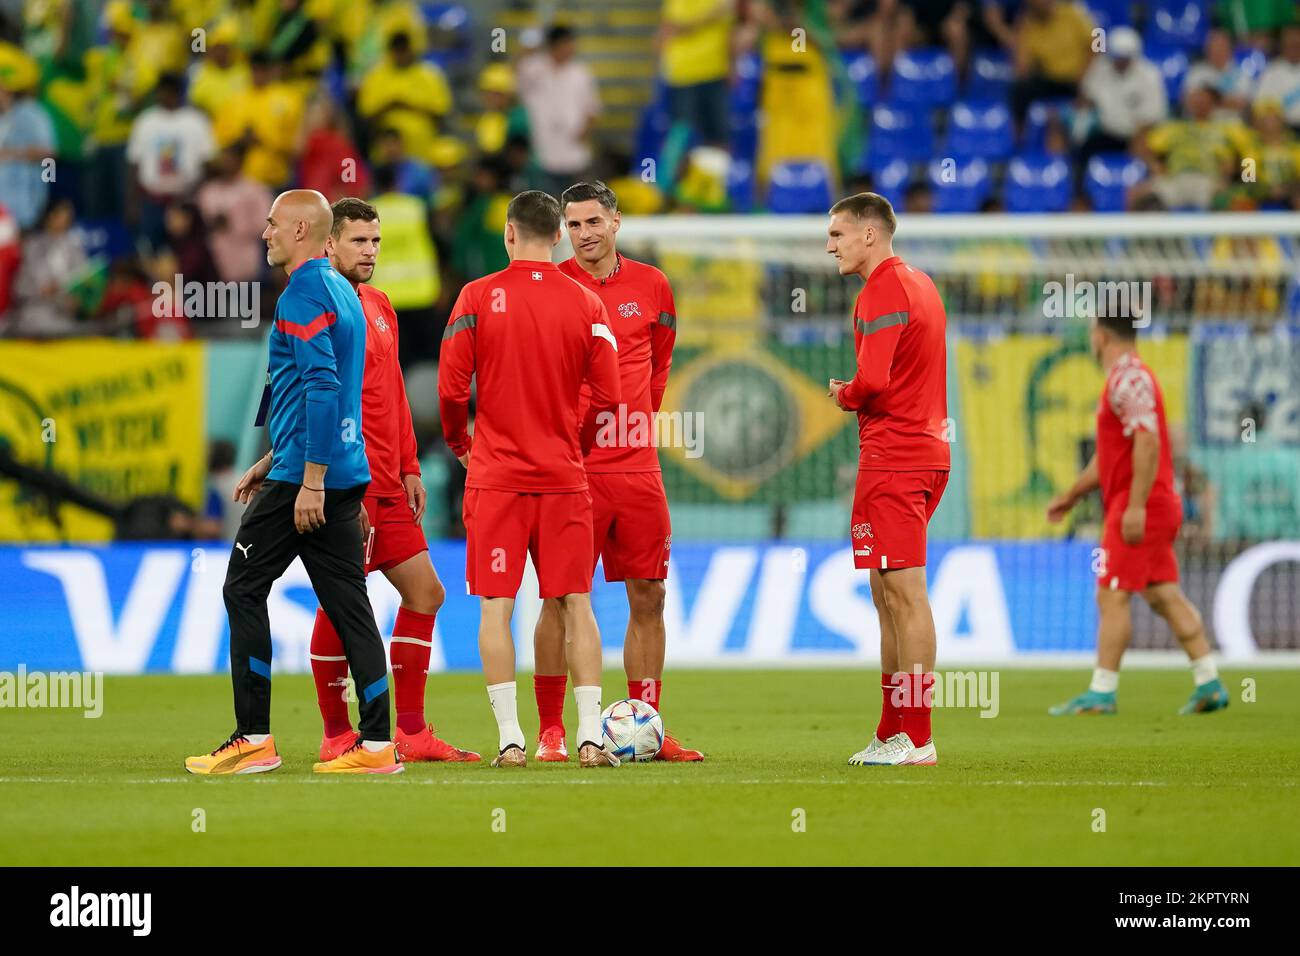 DOHA, QATAR - NOVEMBER 28: Players of Switzerland warm up the FIFA World Cup Qatar 2022 group G match between Brazil and Switzerland at Stadium 974 on November 28, 2022 in Doha, Qatar. (Photo by Florencia Tan Jun/PxImages) Stock Photo